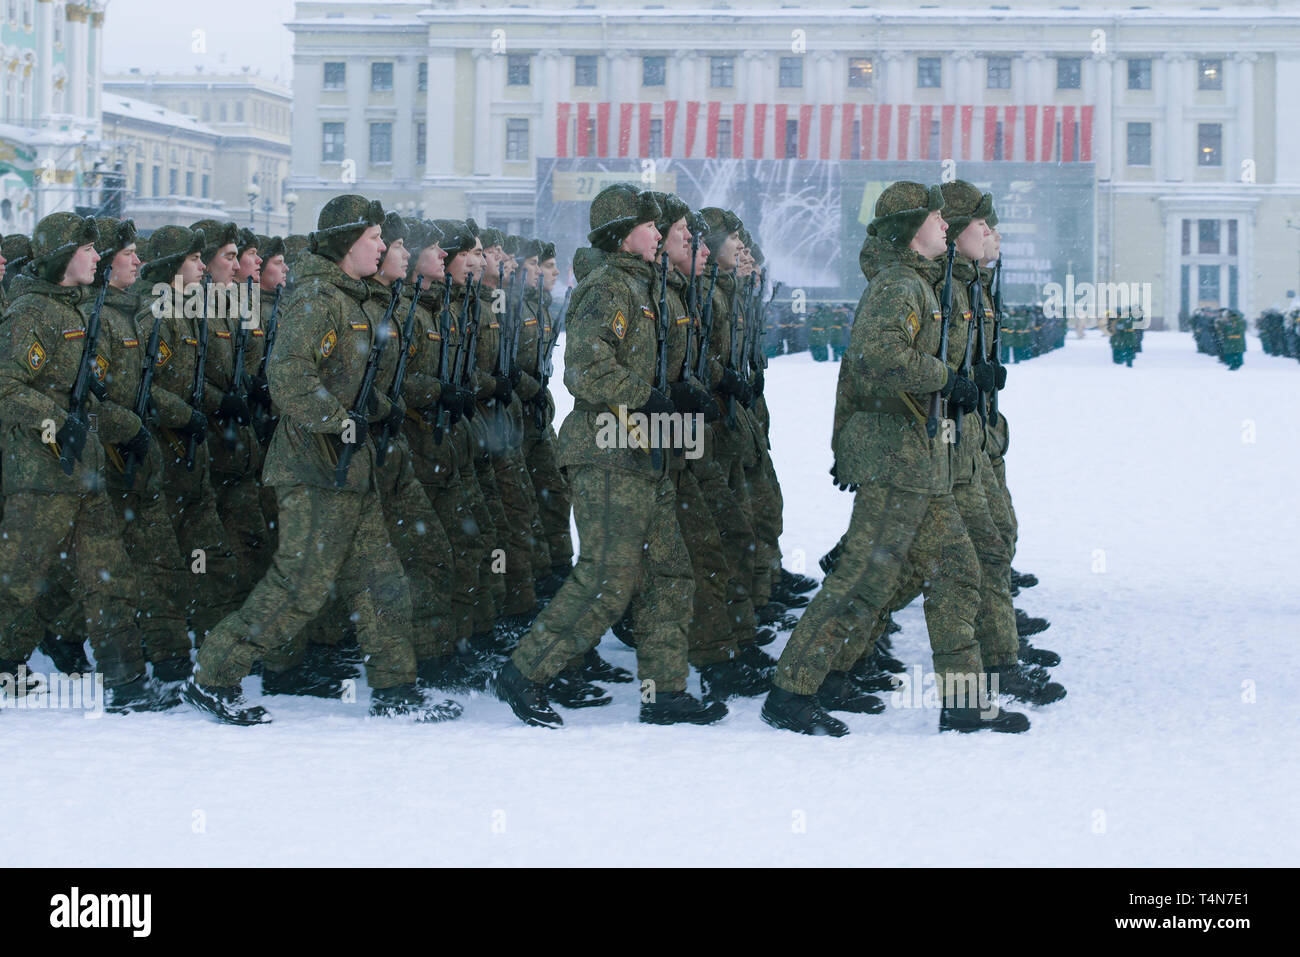 SAINT-PETERSBURG, RUSSIA - JANUARY 24, 2019: Soldiers of the Russian army on the general rehearsal of the military parade in honor of the Day of the c Stock Photo